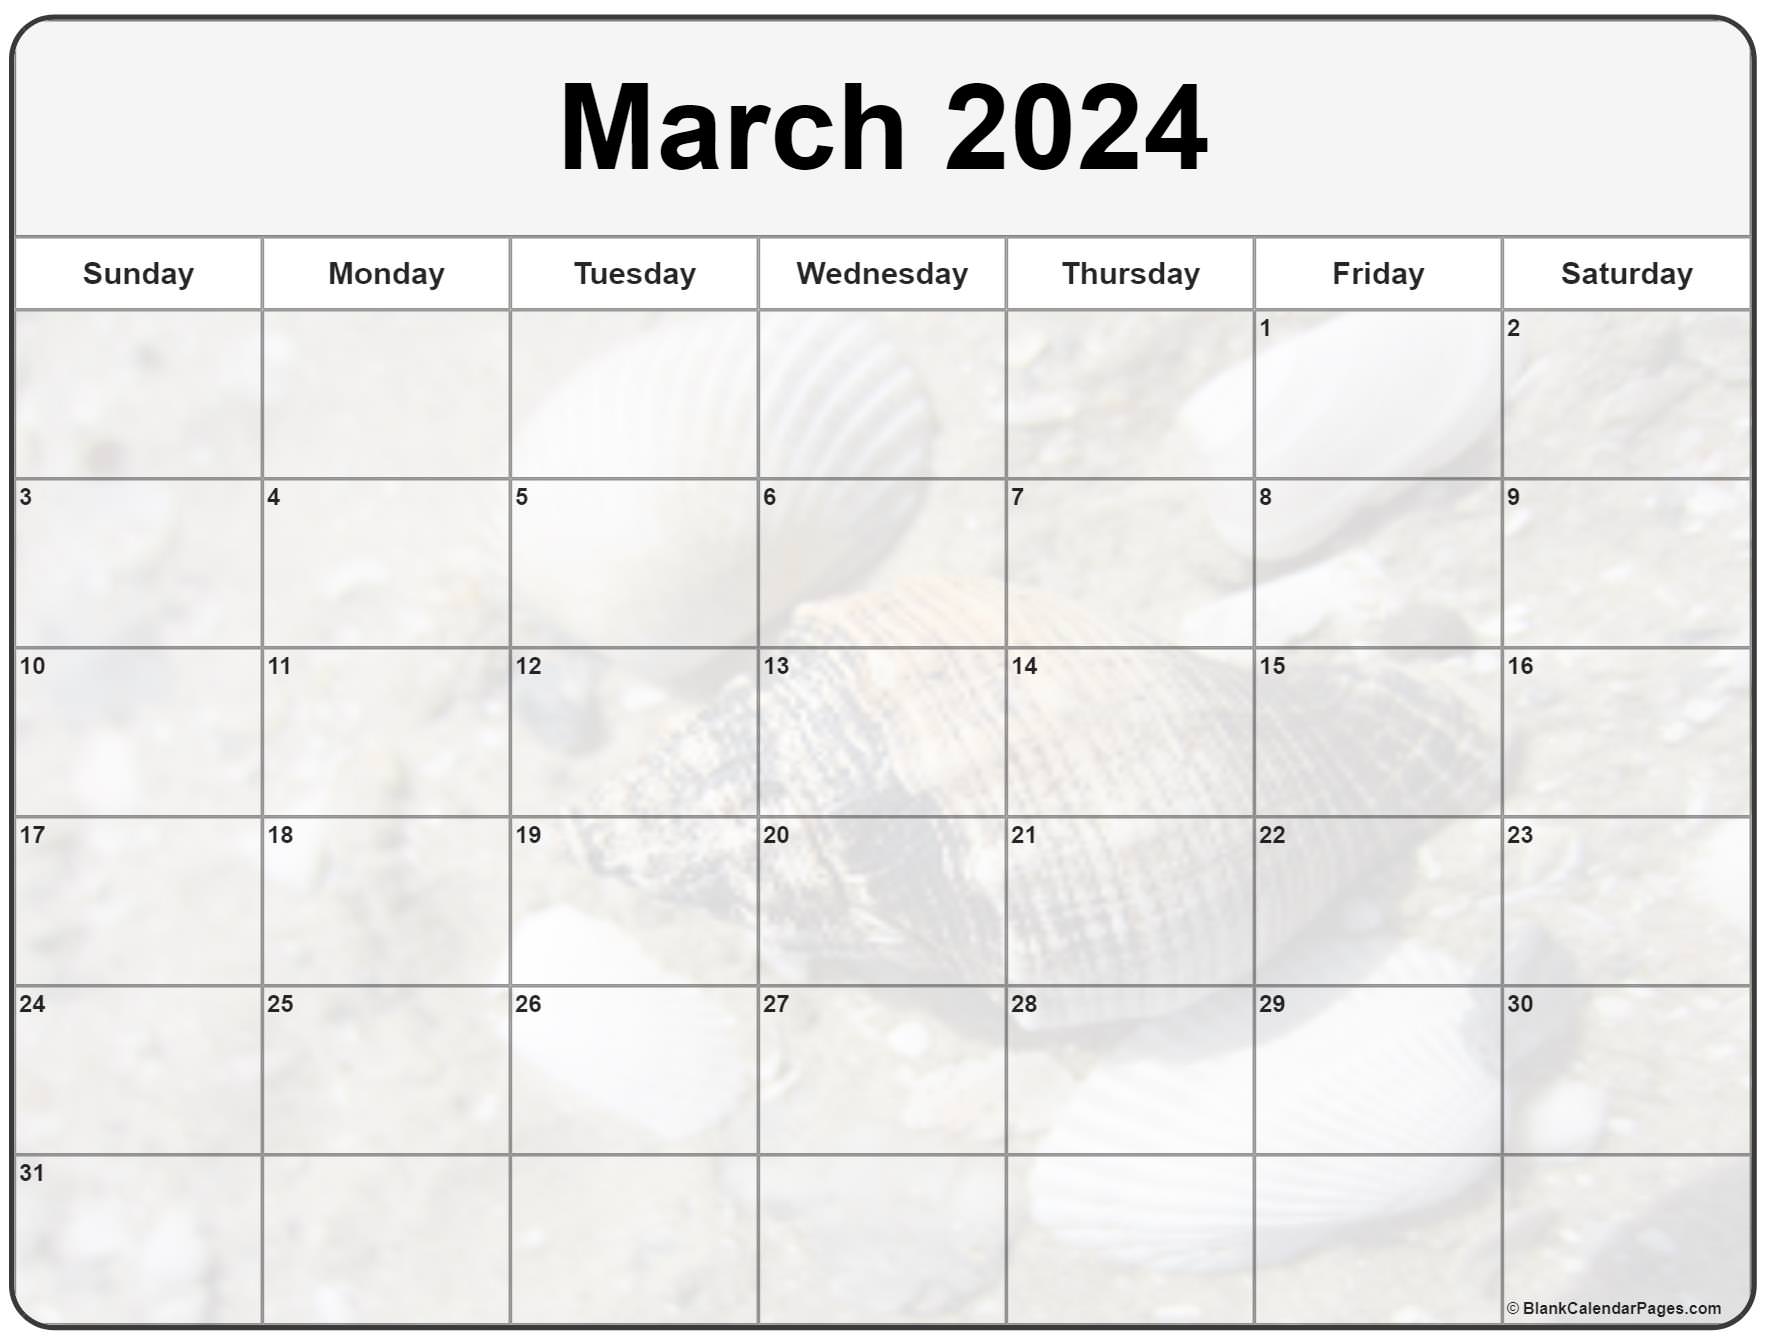 Collection of March 2024 photo calendars with image filters.